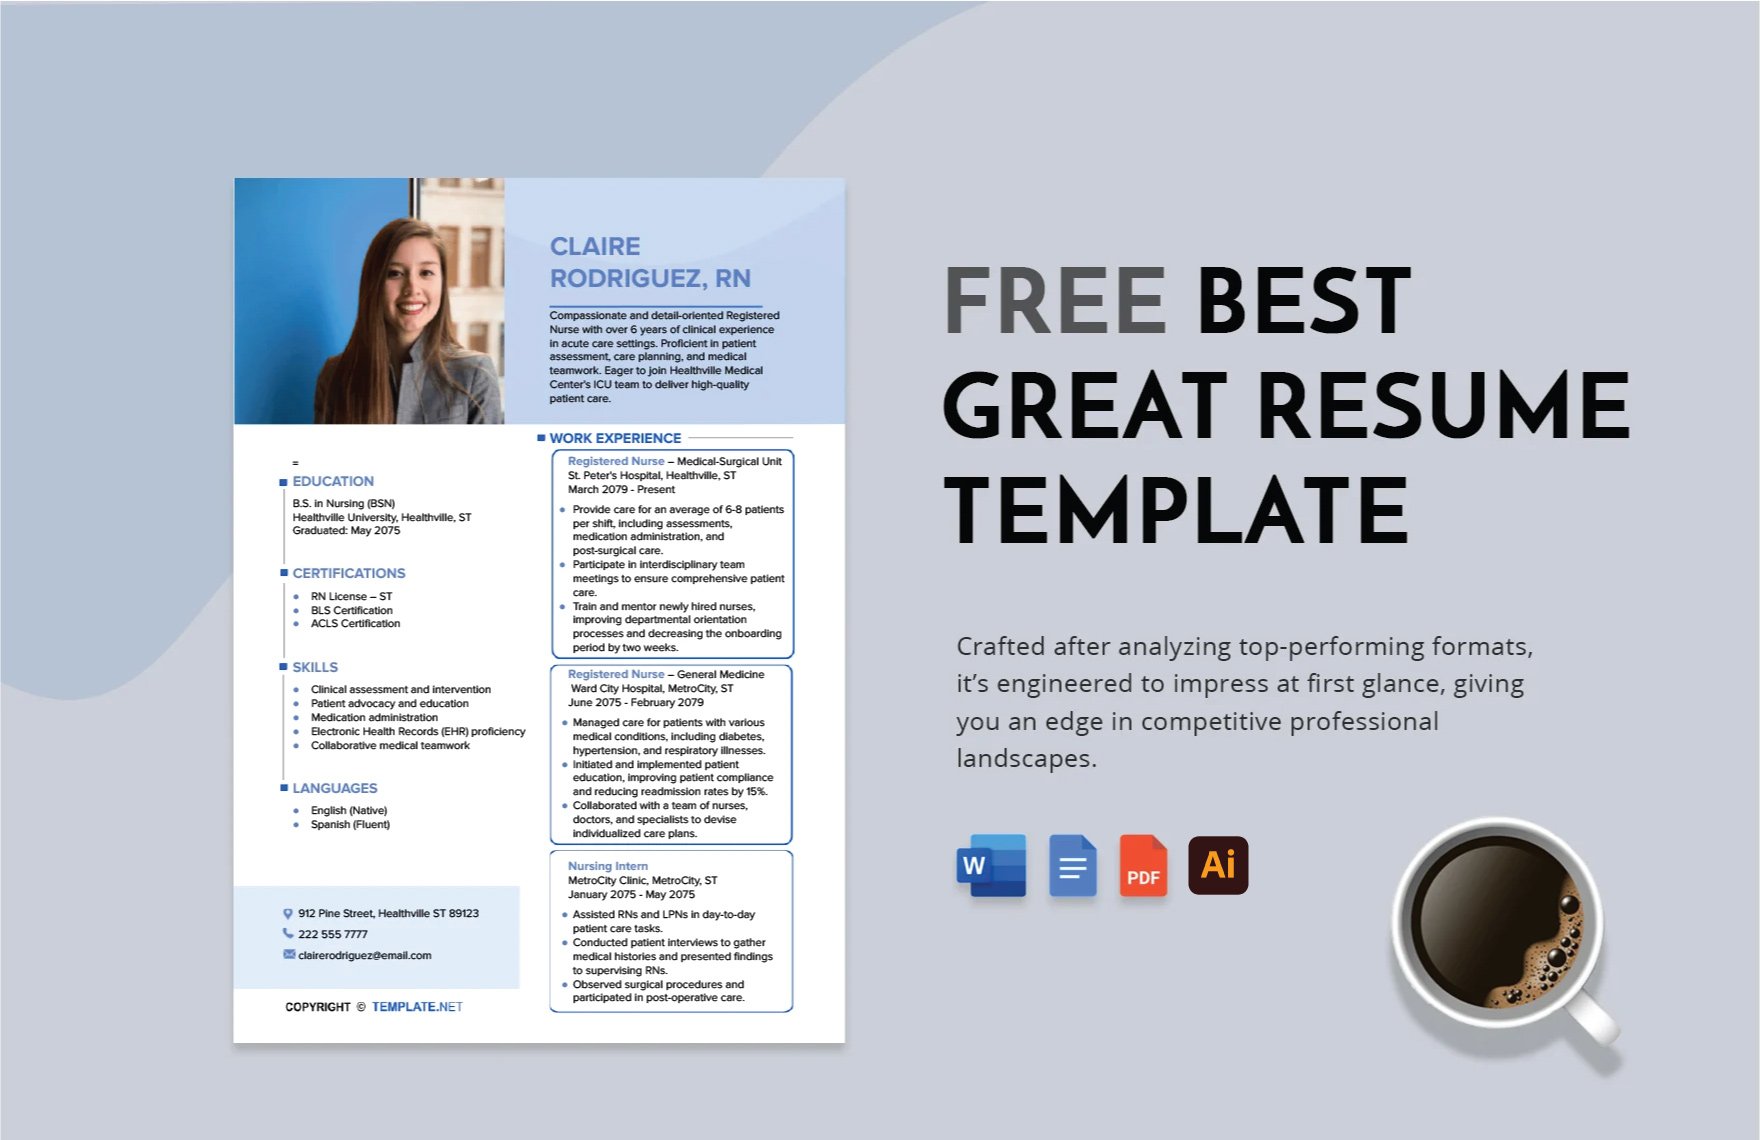 Best Great Resume Template